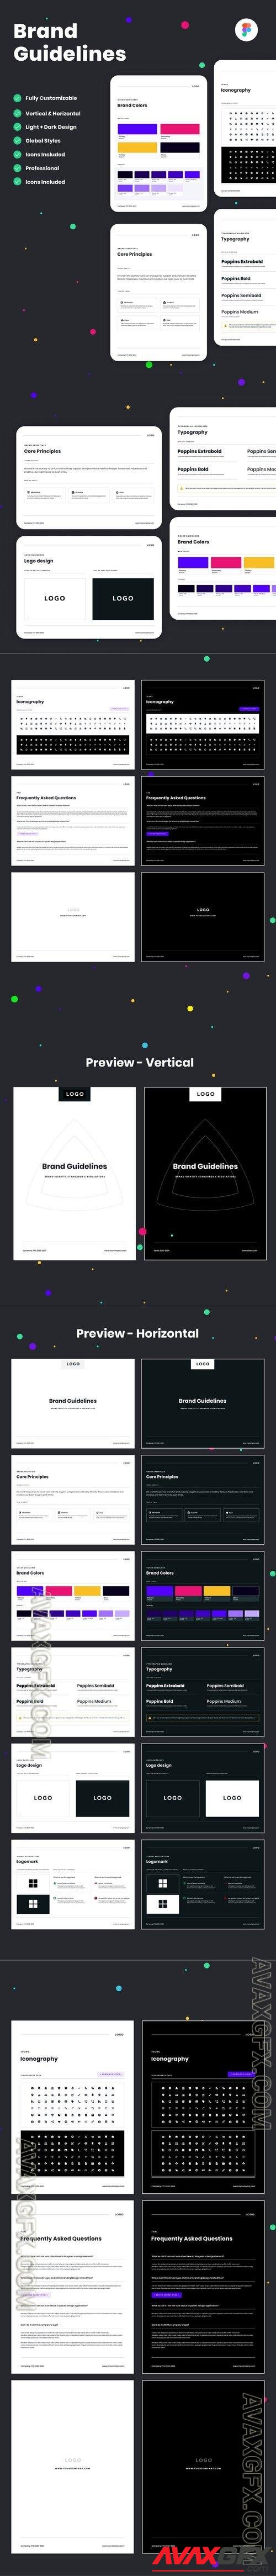 Brand Guidelines Template for Figma